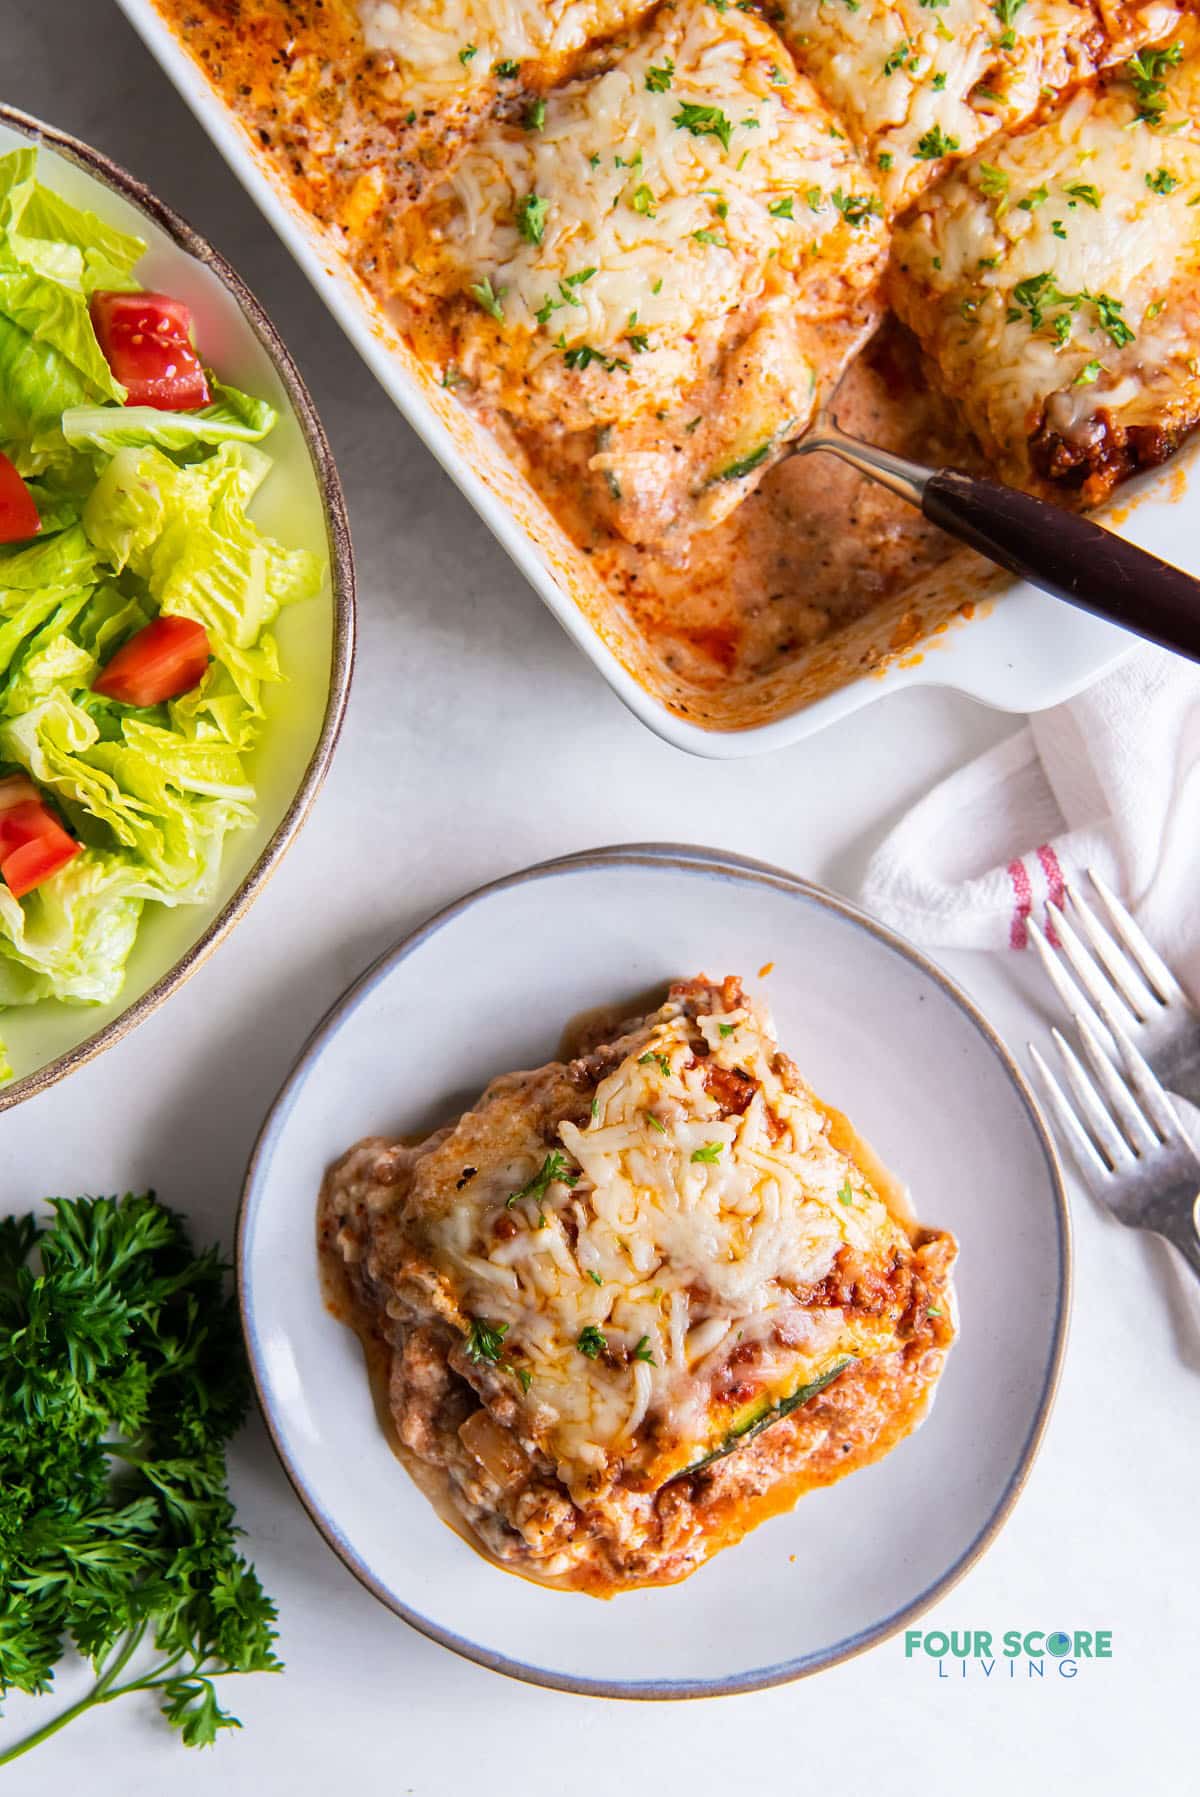 a serving of keto lasagna on a round white plate, next to the pan of lasagna and a side salad of lettuce and tomatoes